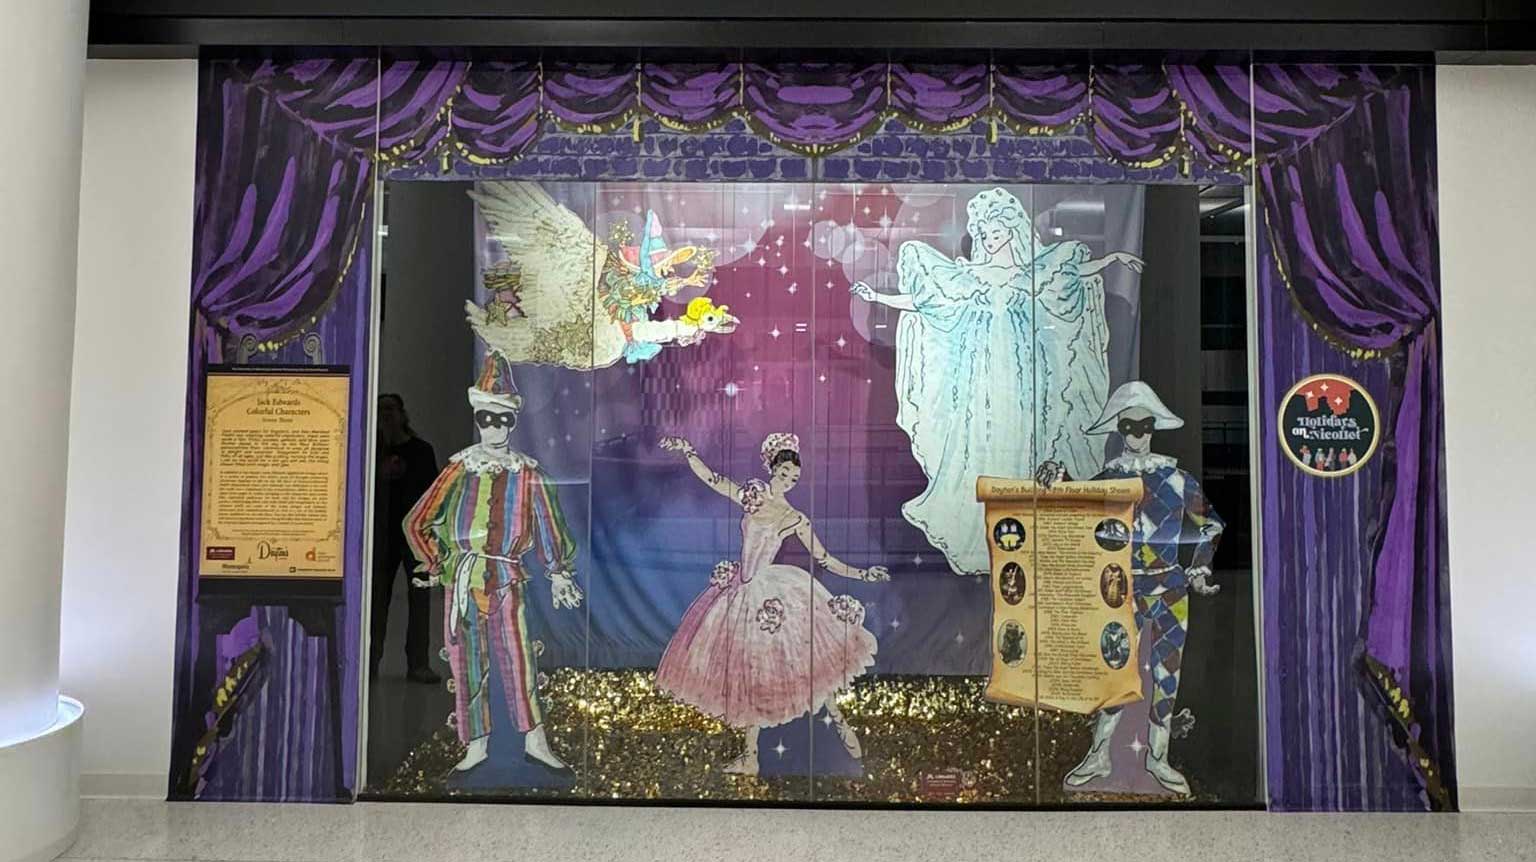 A historic holiday window display at the Dayton's Skyway downtown Minneapolis.